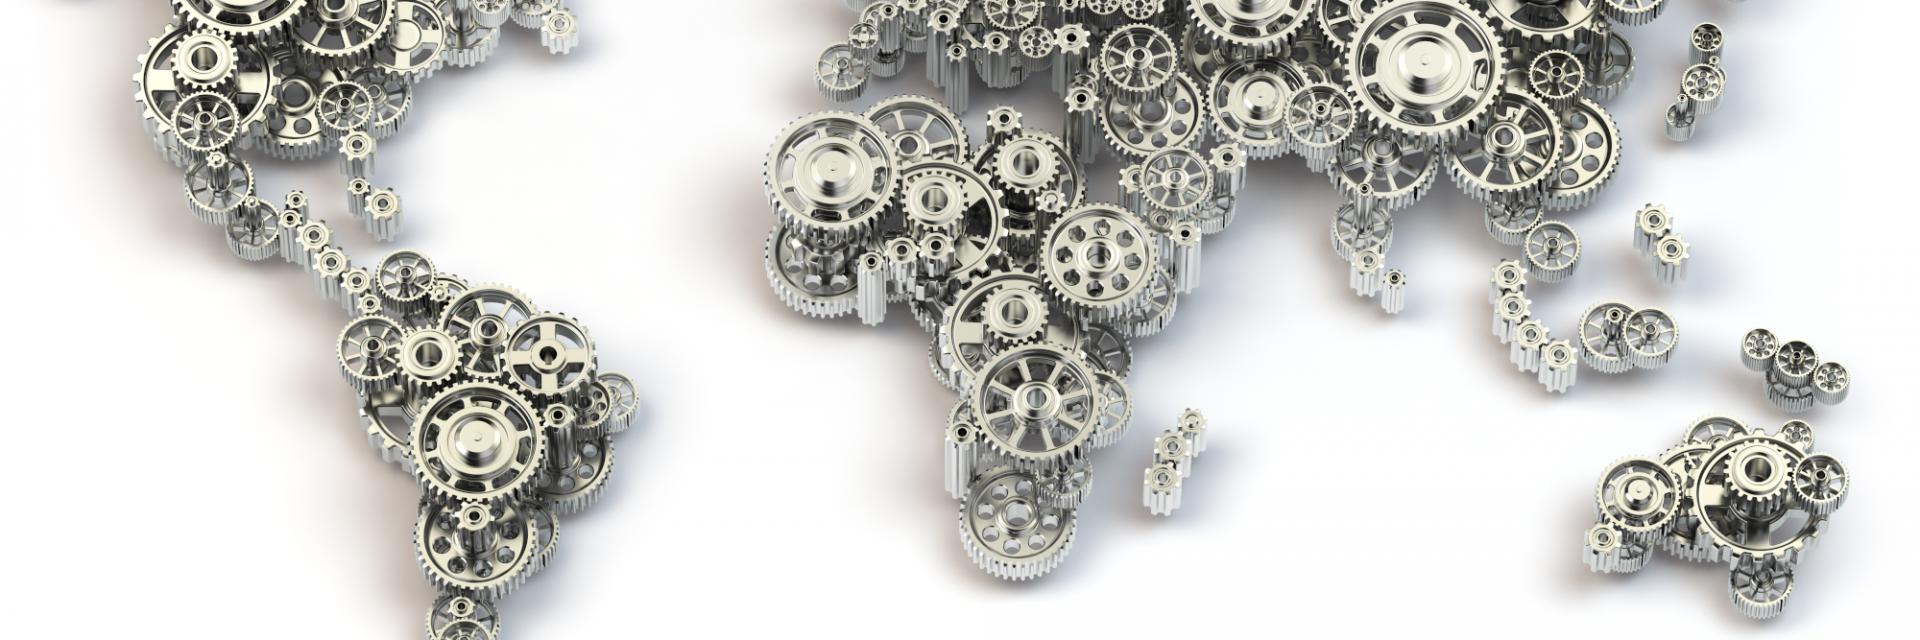 Research and development: key to Africa’s industrialization and economic diversification